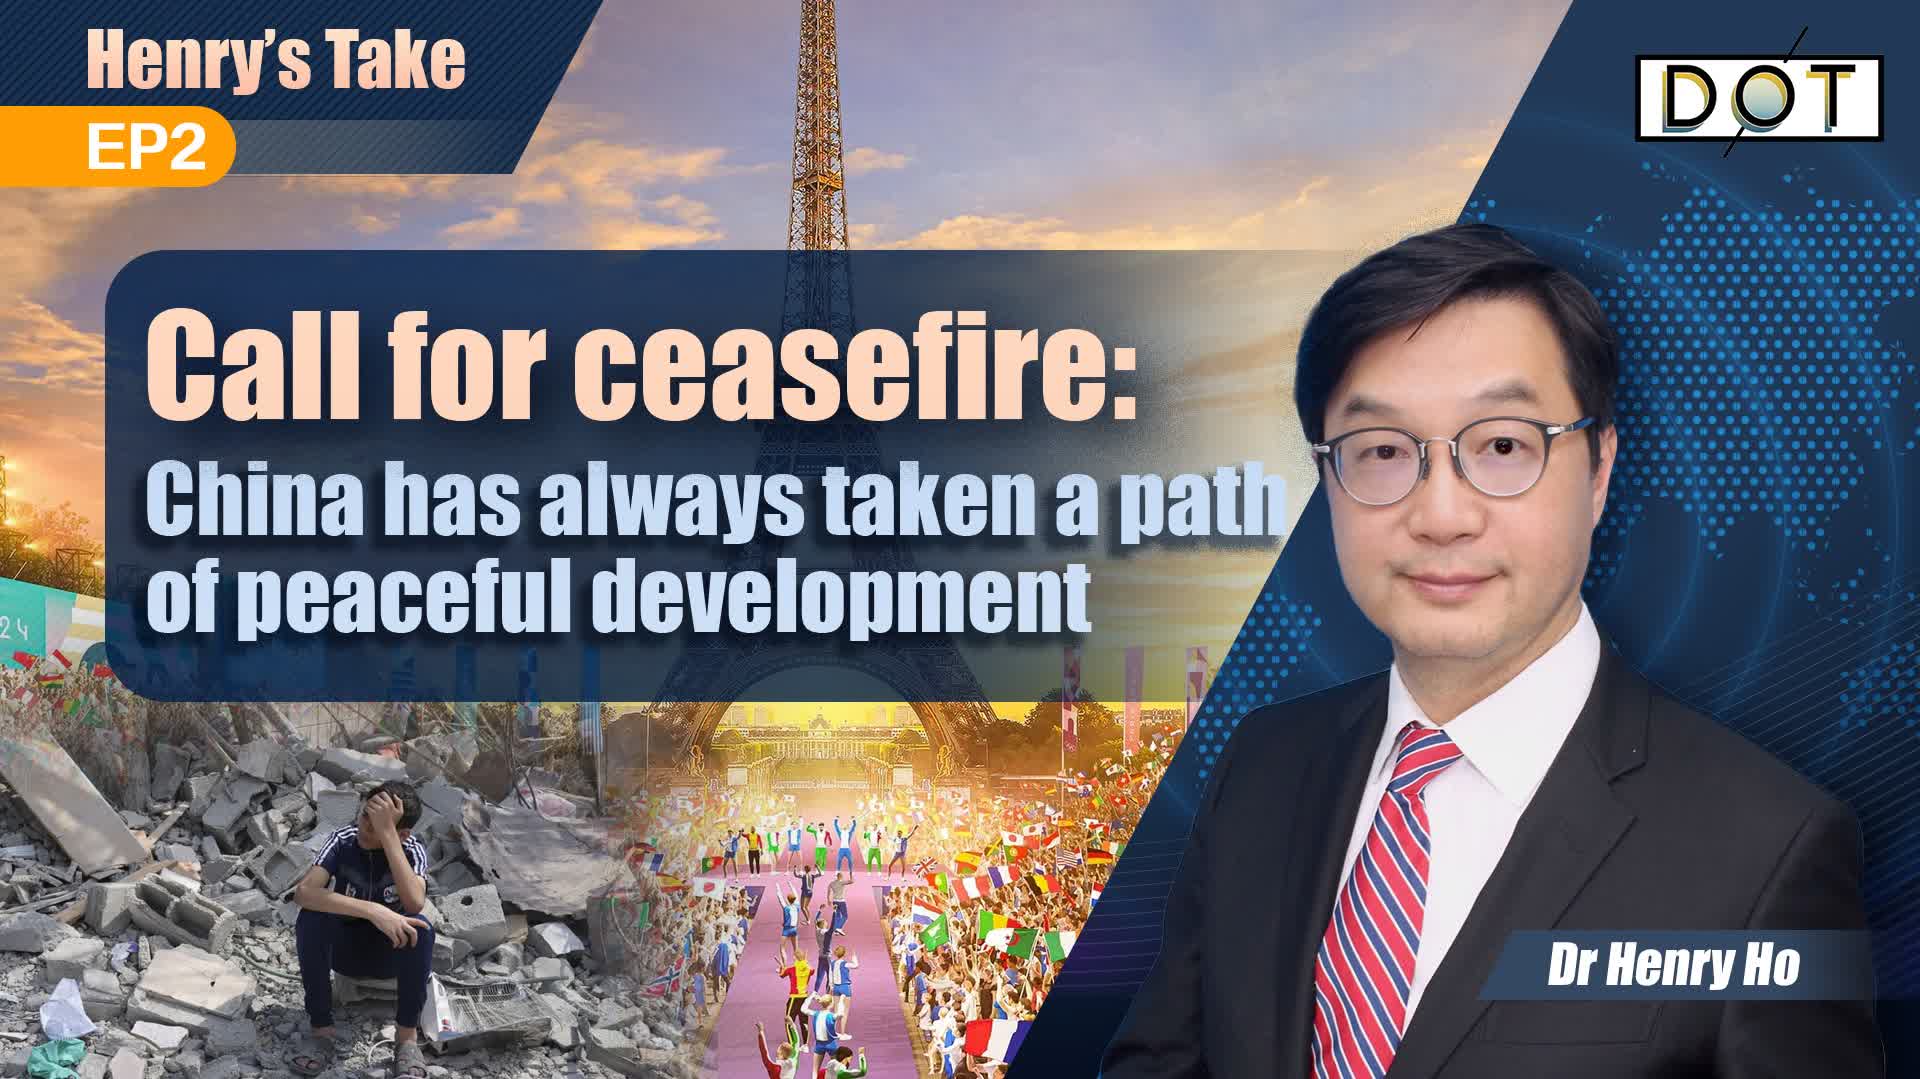 Henry's Take EP2 | Call for ceasefire: China has always taken a path of peaceful development